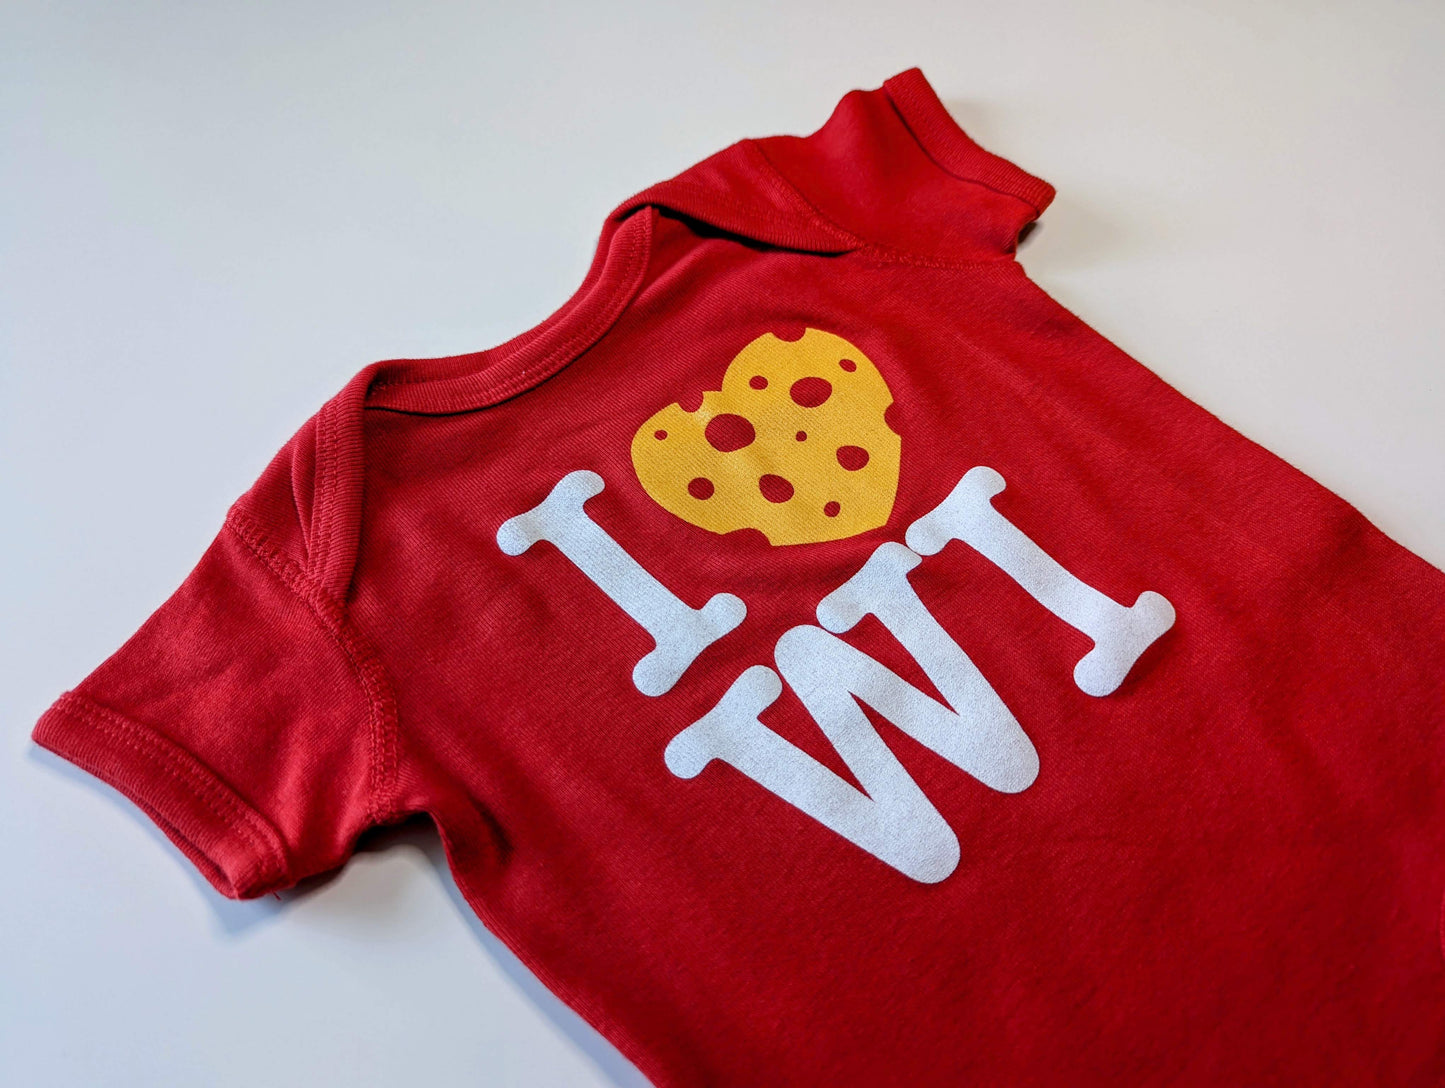 I Love Wisconsin (Cheese) - WI Travel for Babies Screen Printed Onesie Body Suit